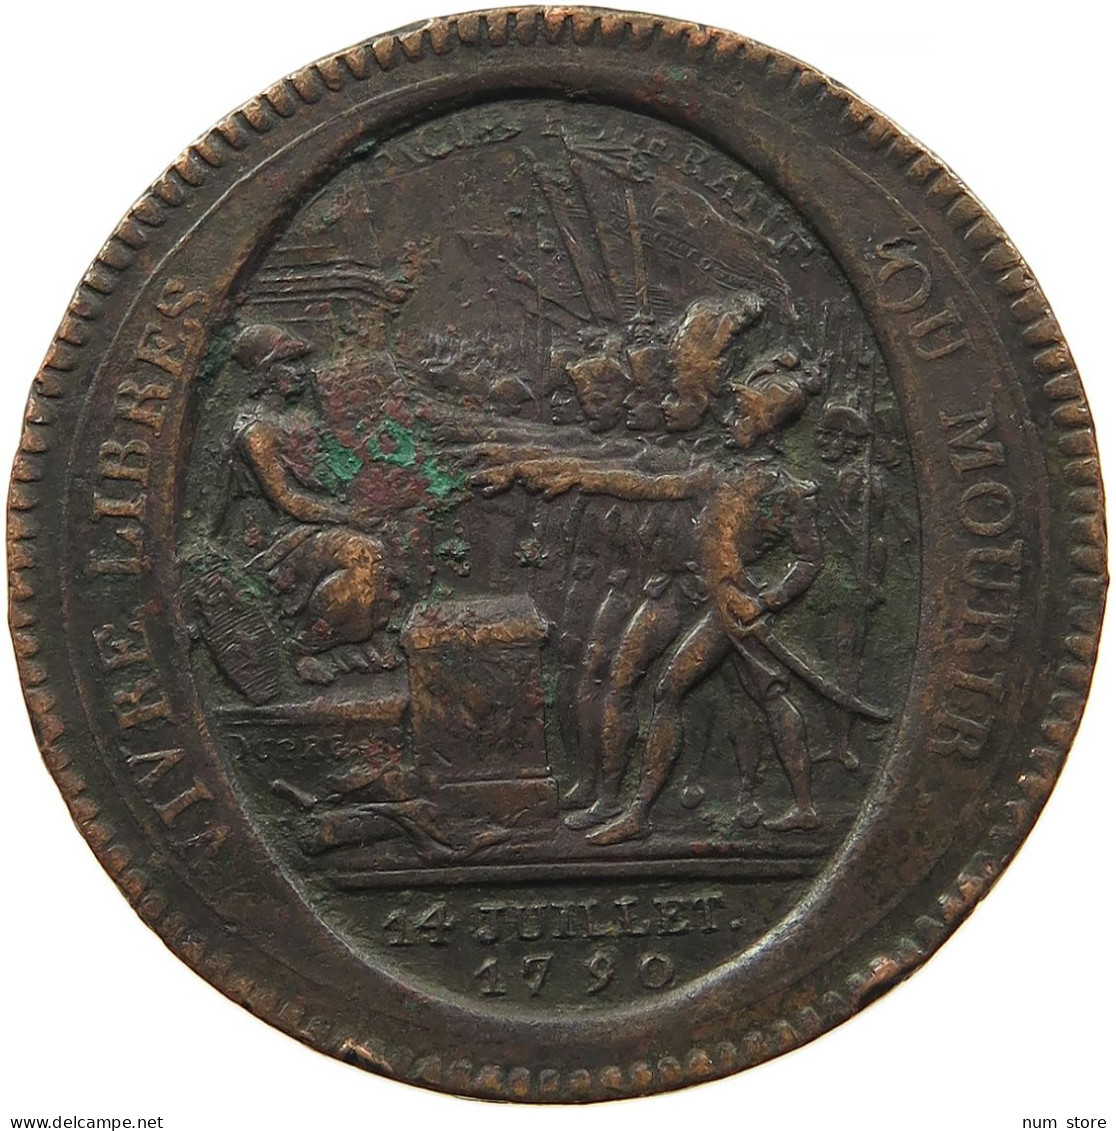 FRANCE 5 SOLS MONNERON 1792 #sm12 0255 - 1791-1792 Constitution (An I)